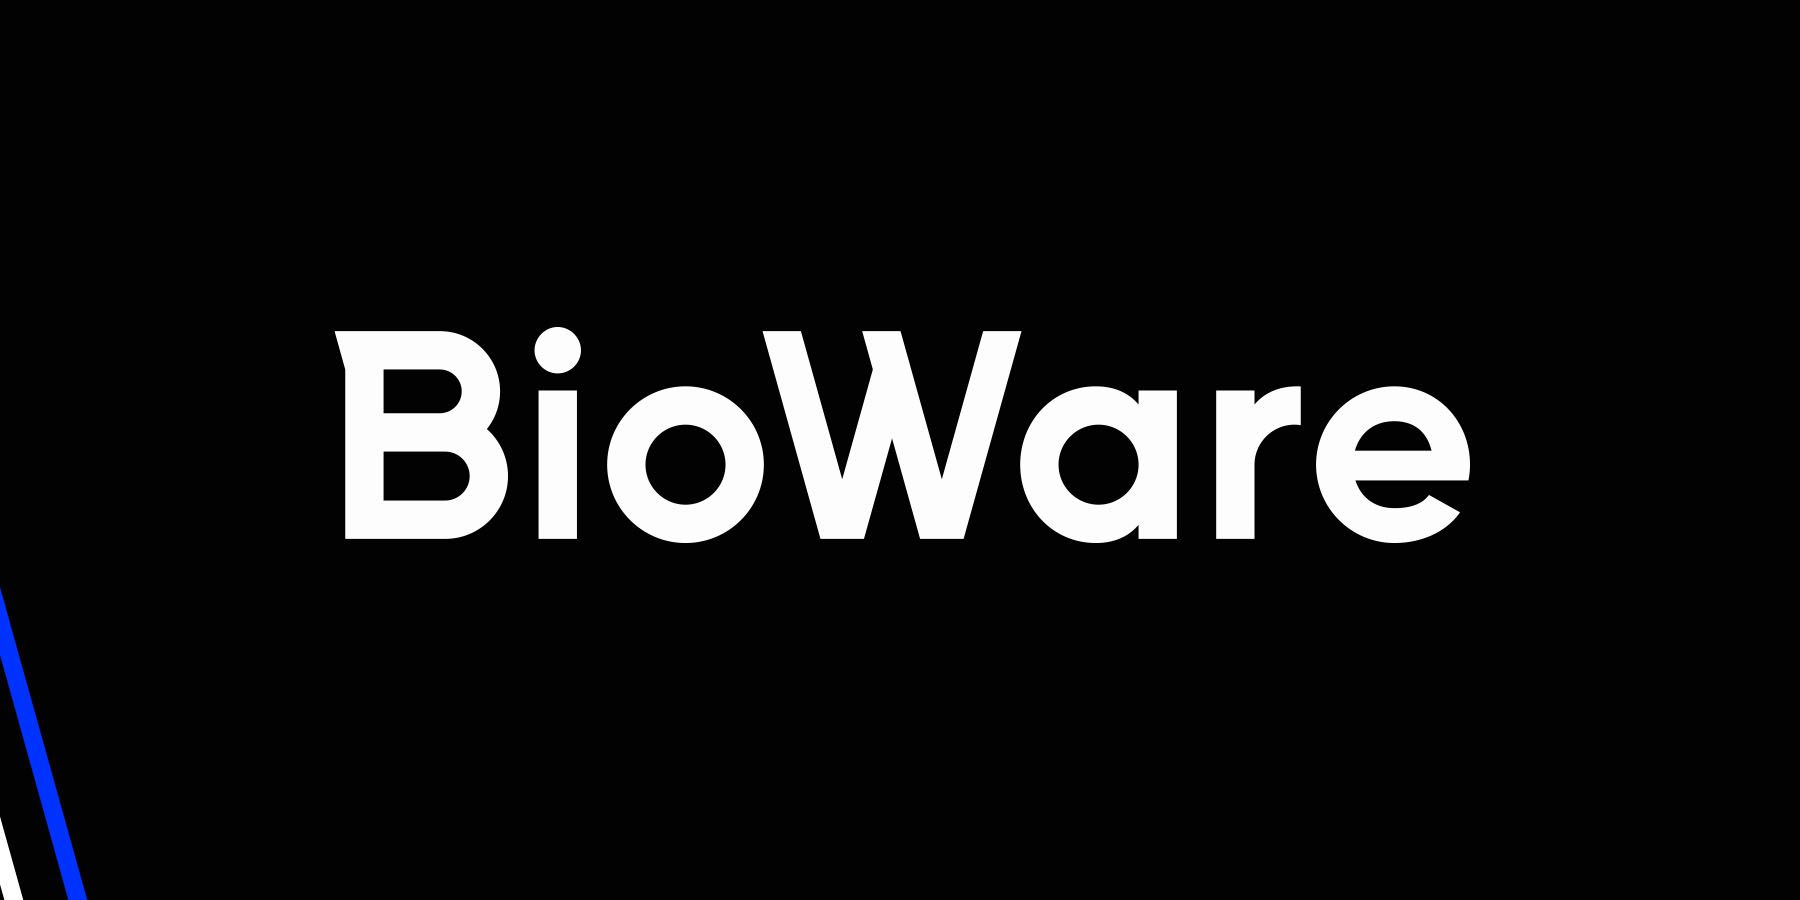 A white BioWare logo against a black background with blue and grey strips along the lower left corner.